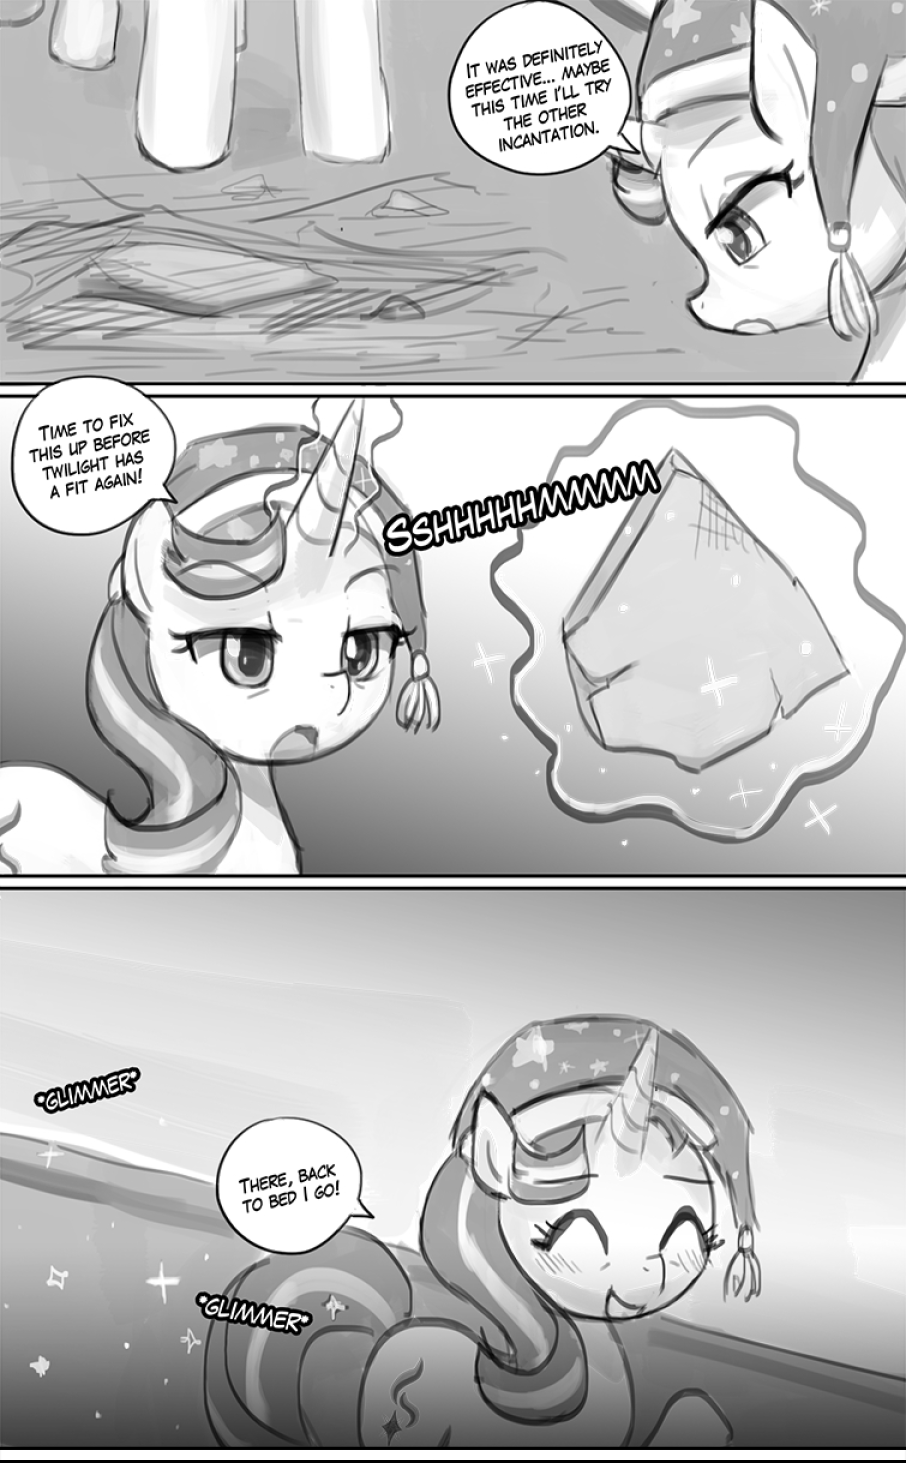 Homesick Part 2: Hearth's Warming Eve porn comic picture 3